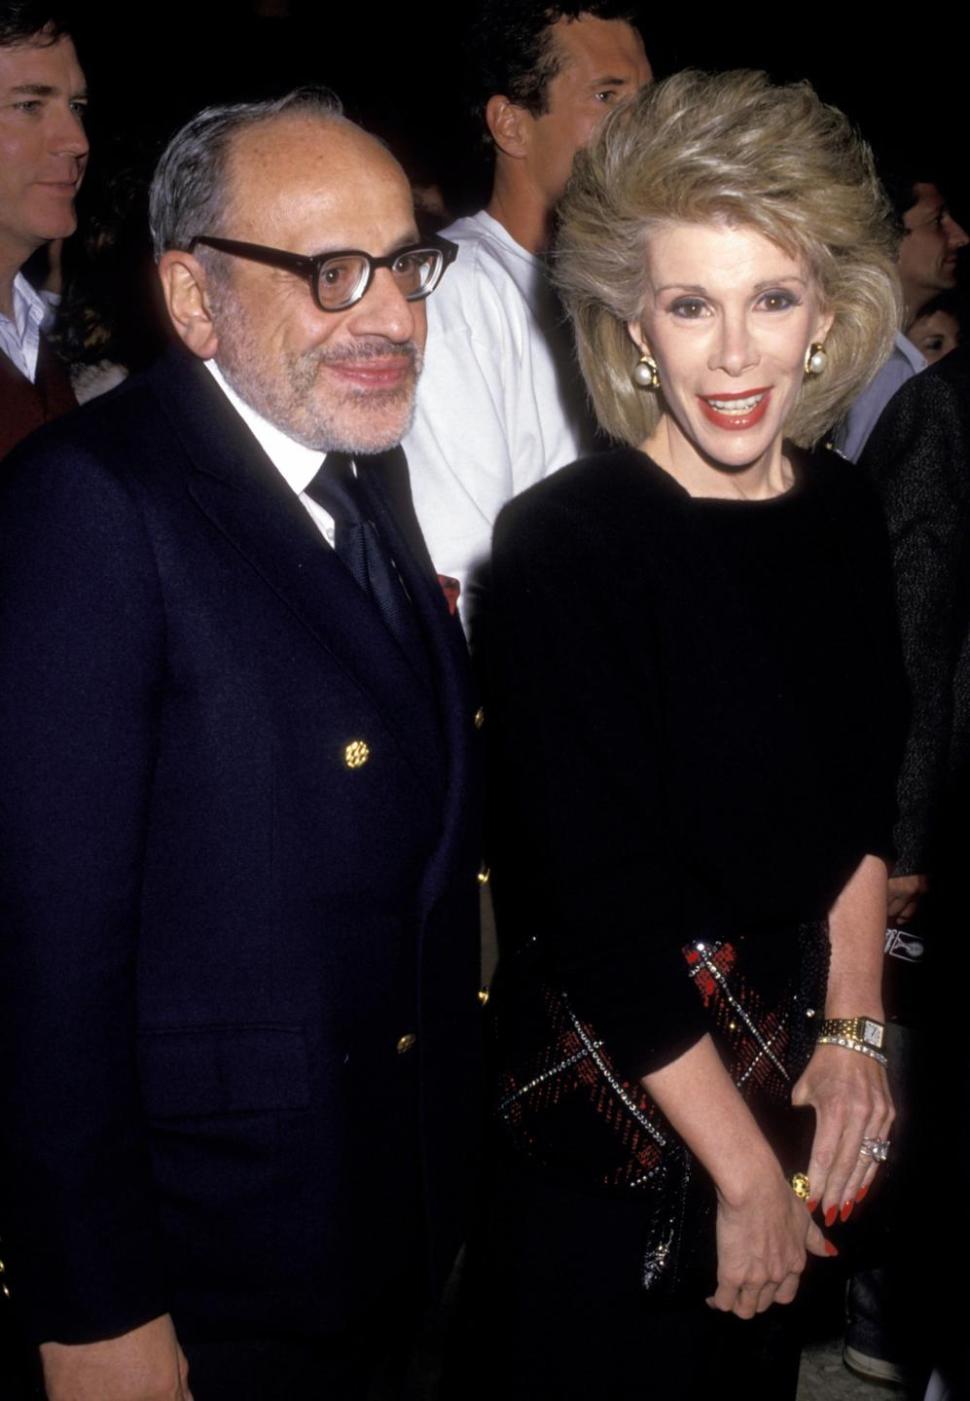 Edgar Rosenberg pictured with Joan Rivers in Los Angeles on June 19, 1987, just a few months before his death.